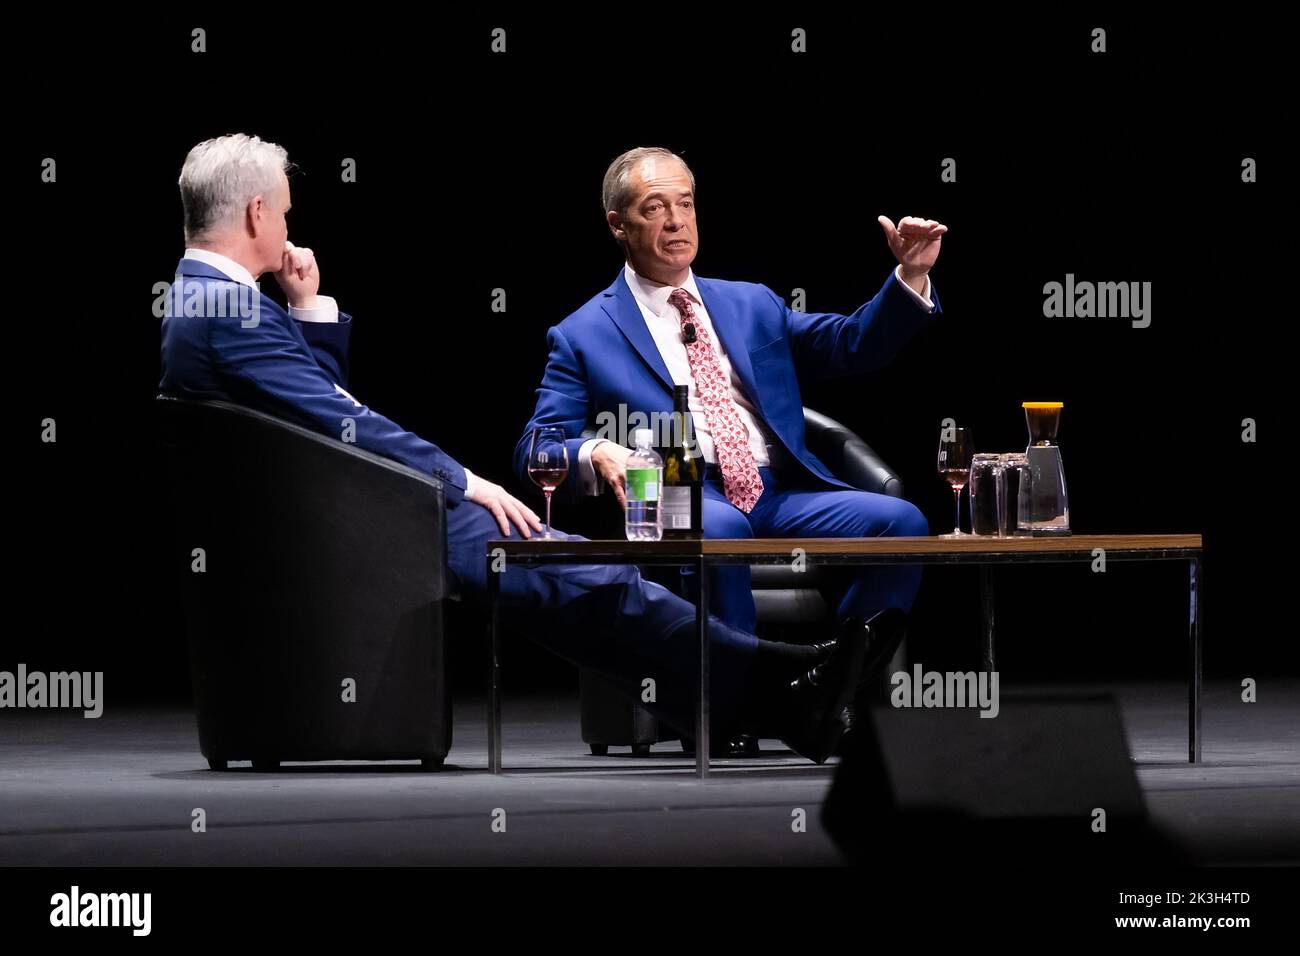 Melbourne, Australia, 26 September, 2022. Nigel Farage and Ross Cameron take questions from a sold out audience during An Evening With Nigel Farage at The Melbourne Convention and Exhibition Centre on September 26, 2022 in Melbourne, Australia. Credit: Dave Hewison/Speed Media/Alamy Live News Stock Photo